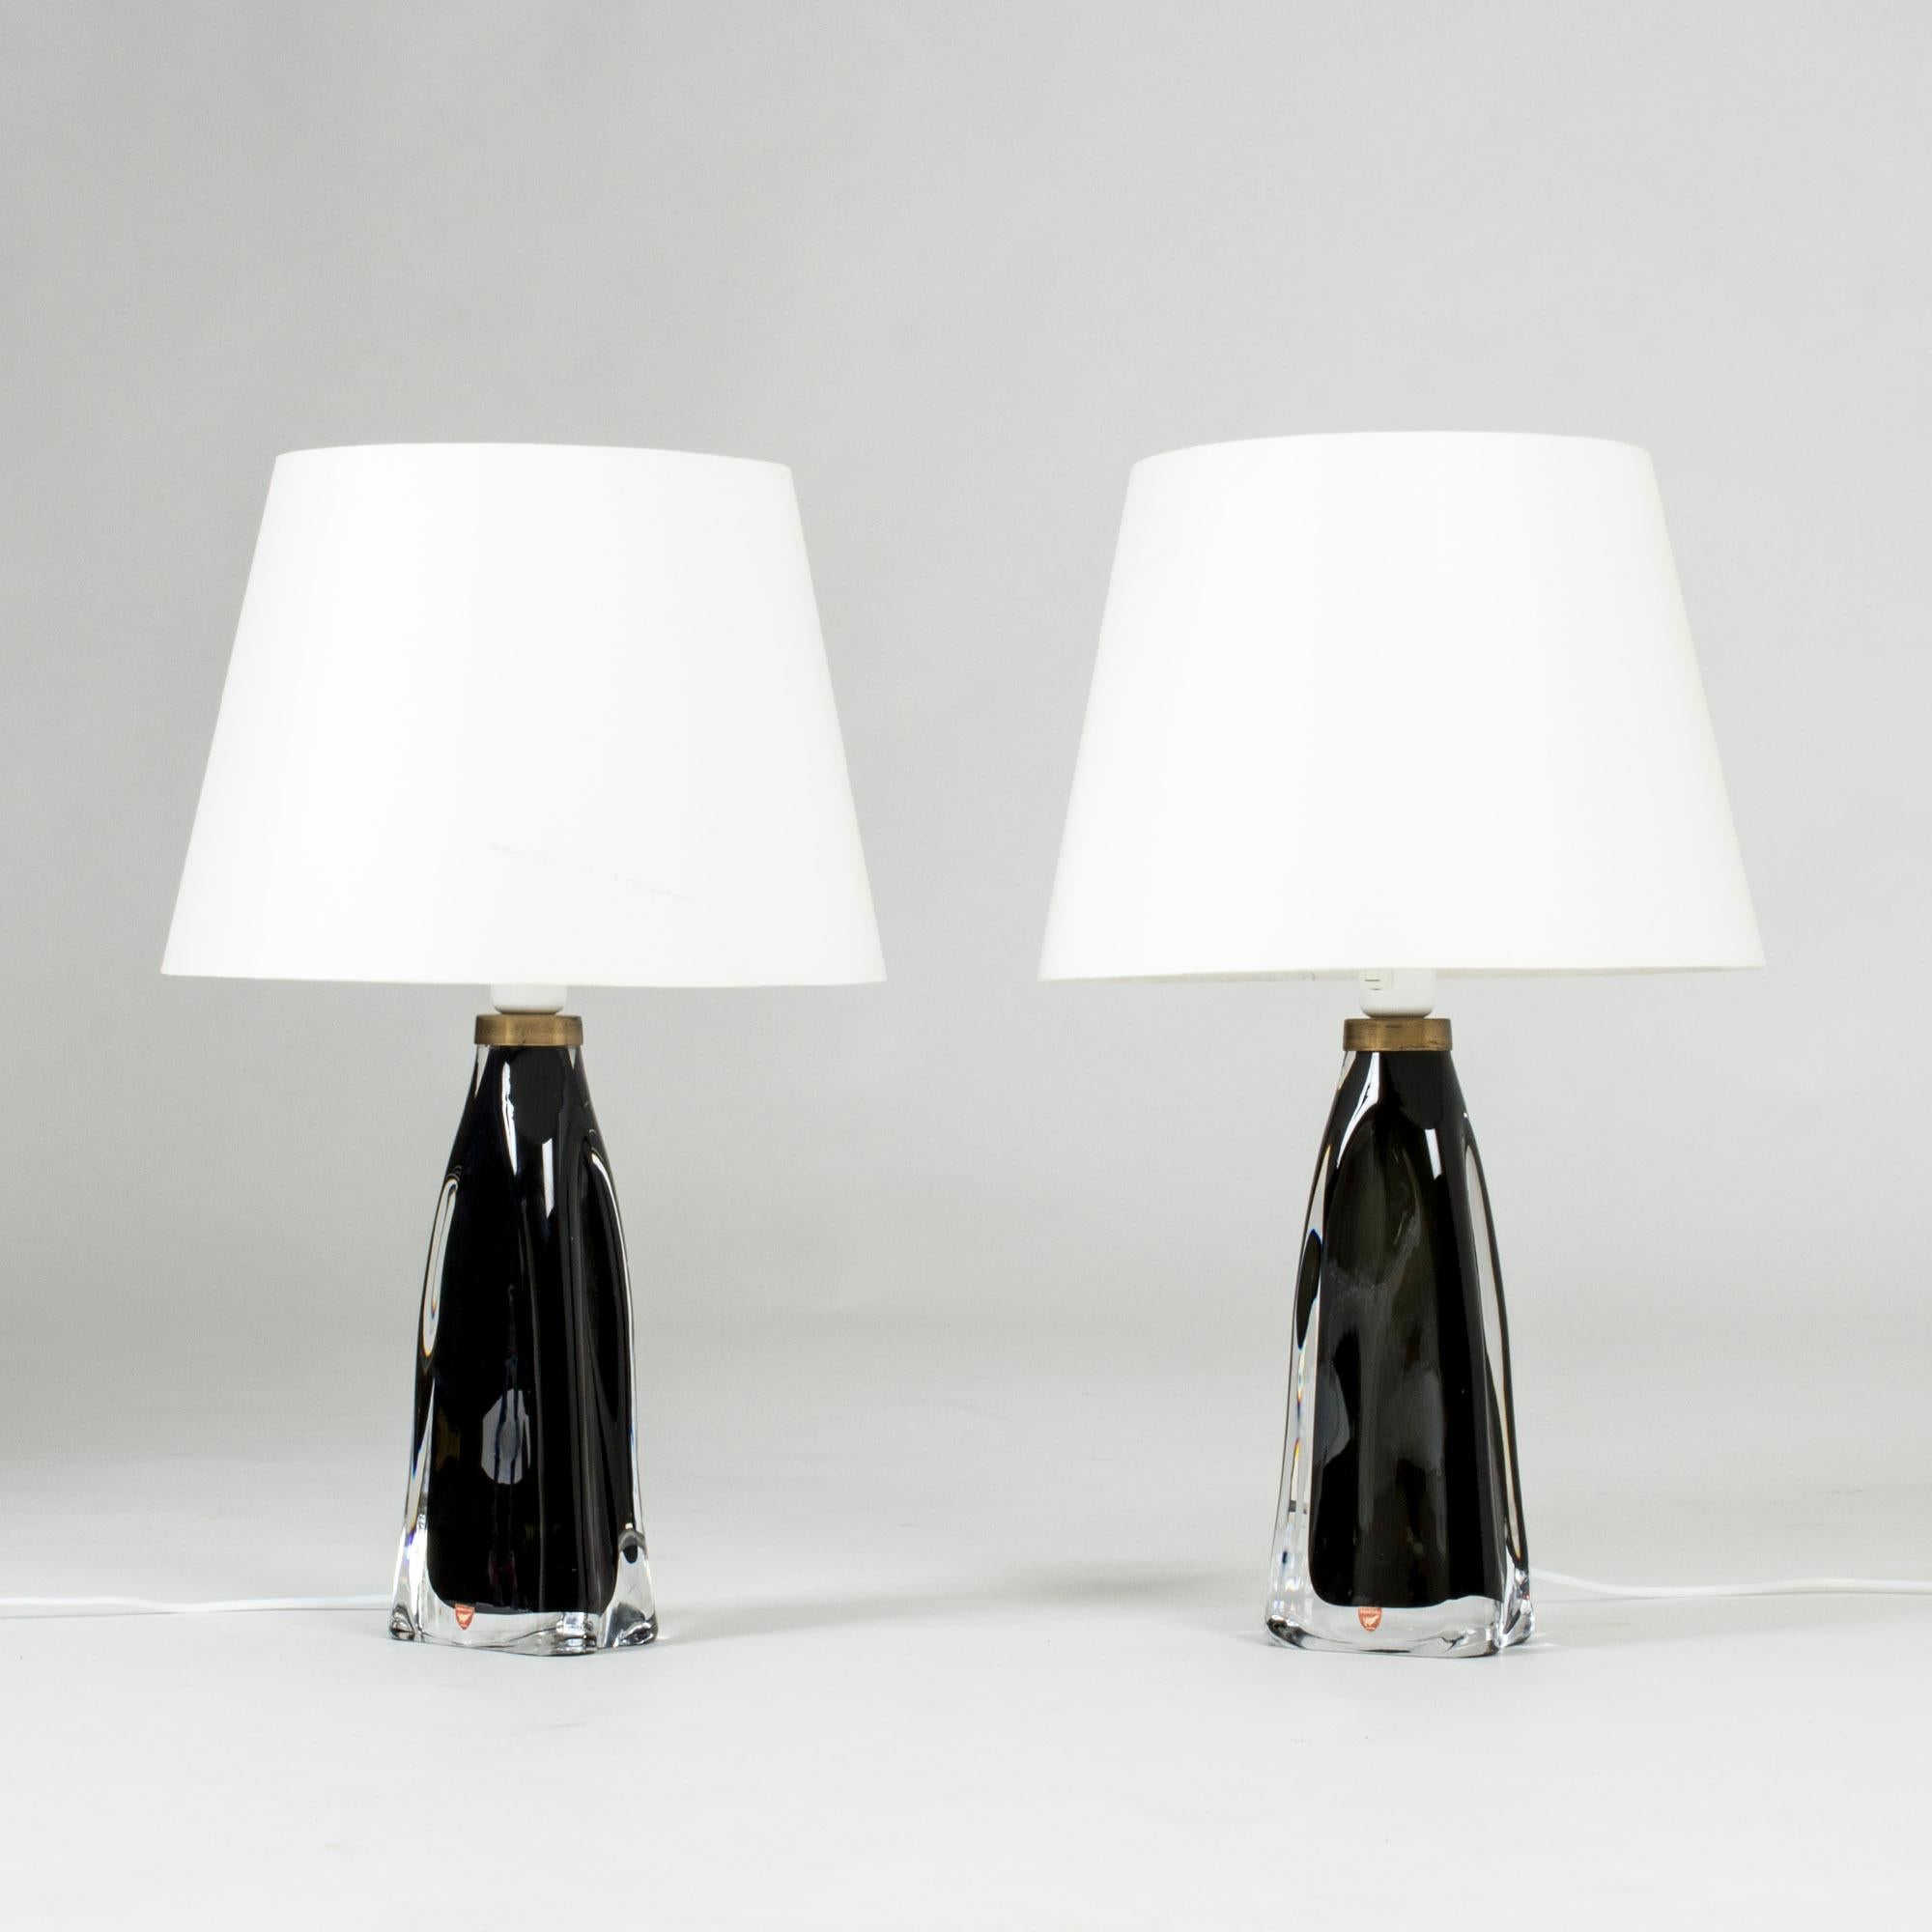 Pair of black, barely translucent glass table lamps by Carl Fagerlund for Orrefors. Heavy glass bases with a somewhat undulating shape and brass detail at the top. Very elegant with movement in the design.